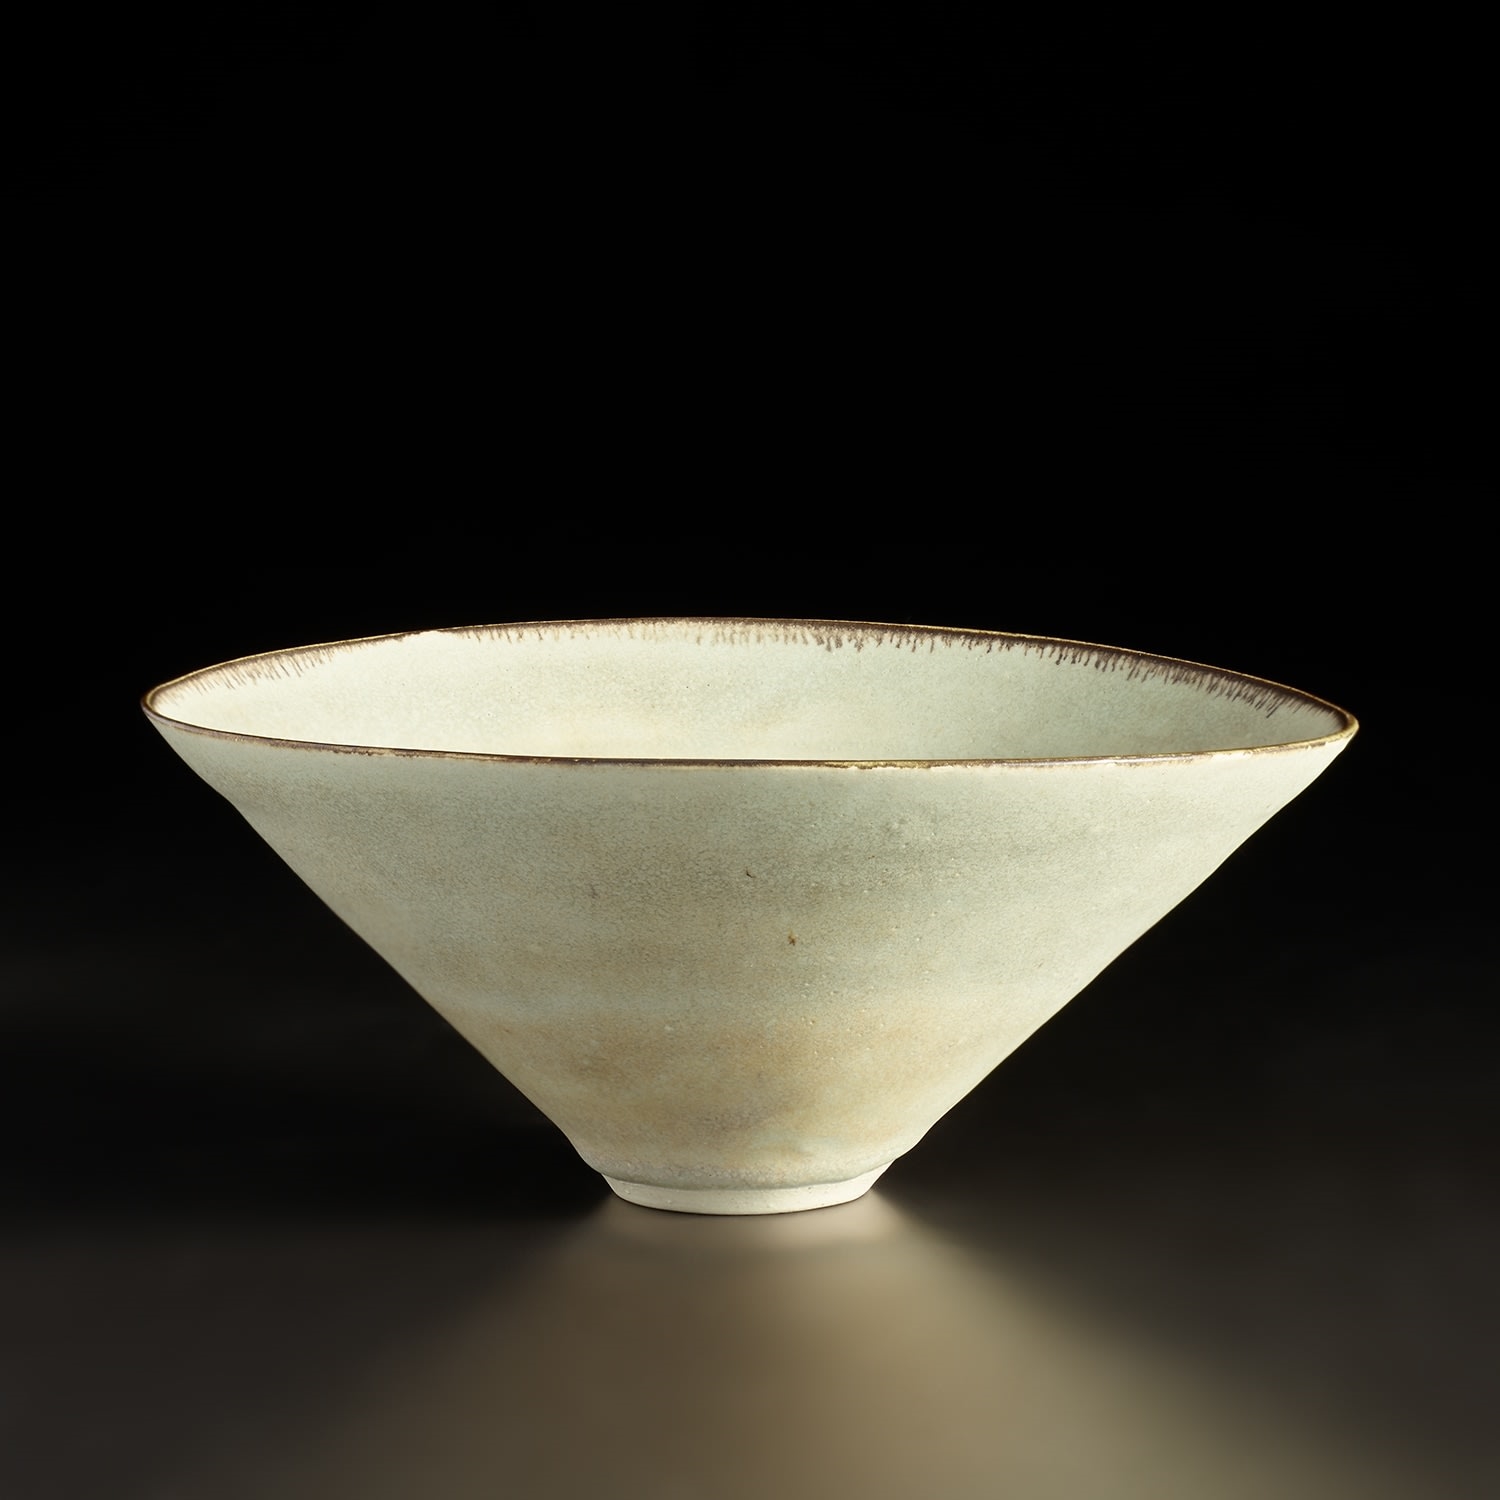 https://media.mutualart.com/Images/2023_04/15/18/181926787/lucie-rie-conical-bowl-IX42S.Jpeg?w=480